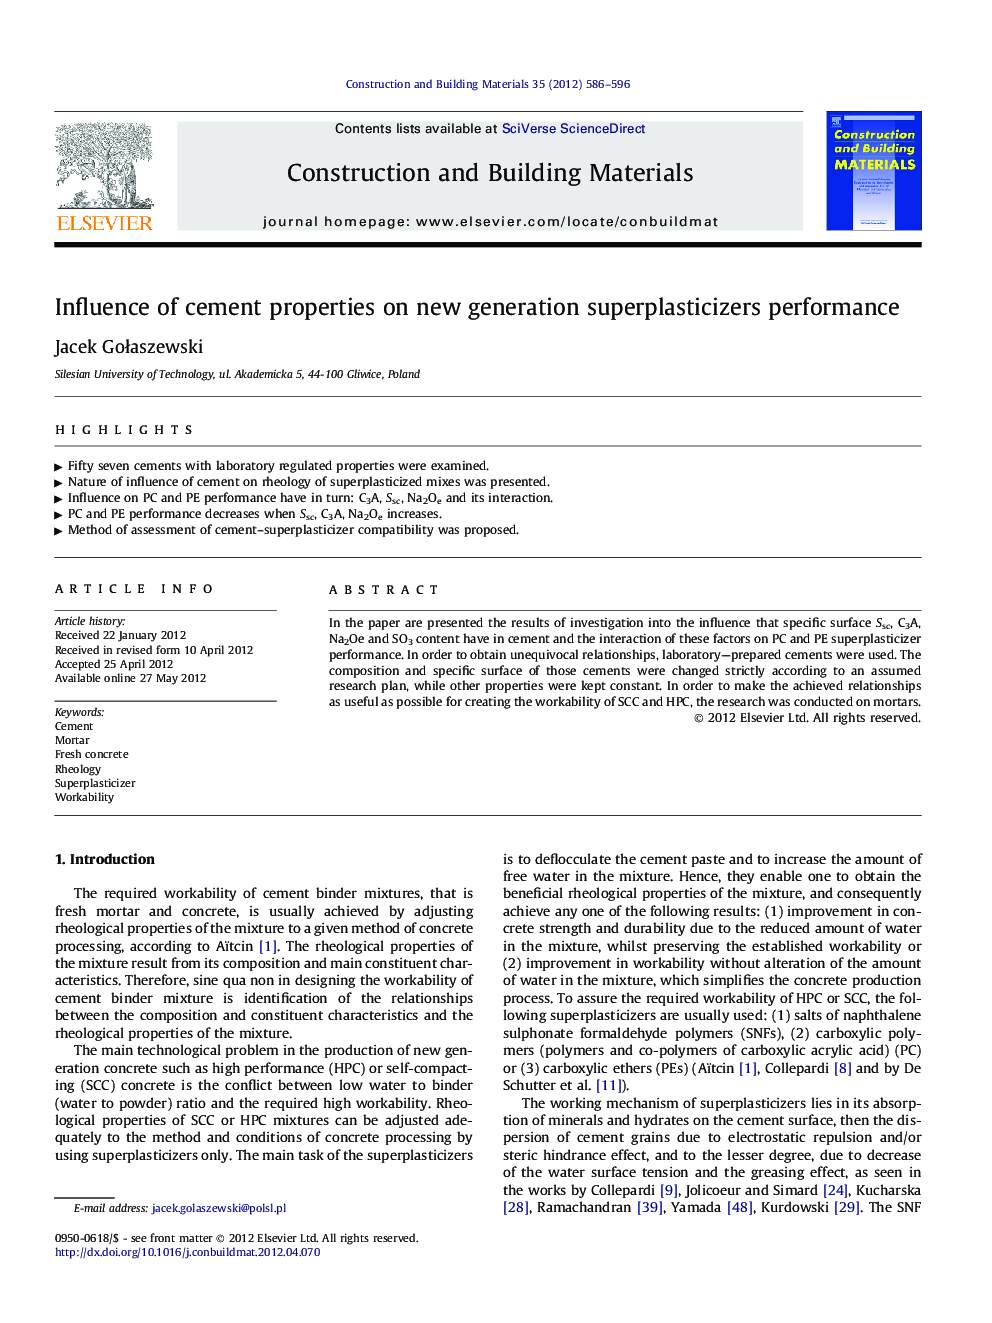 Influence of cement properties on new generation superplasticizers performance